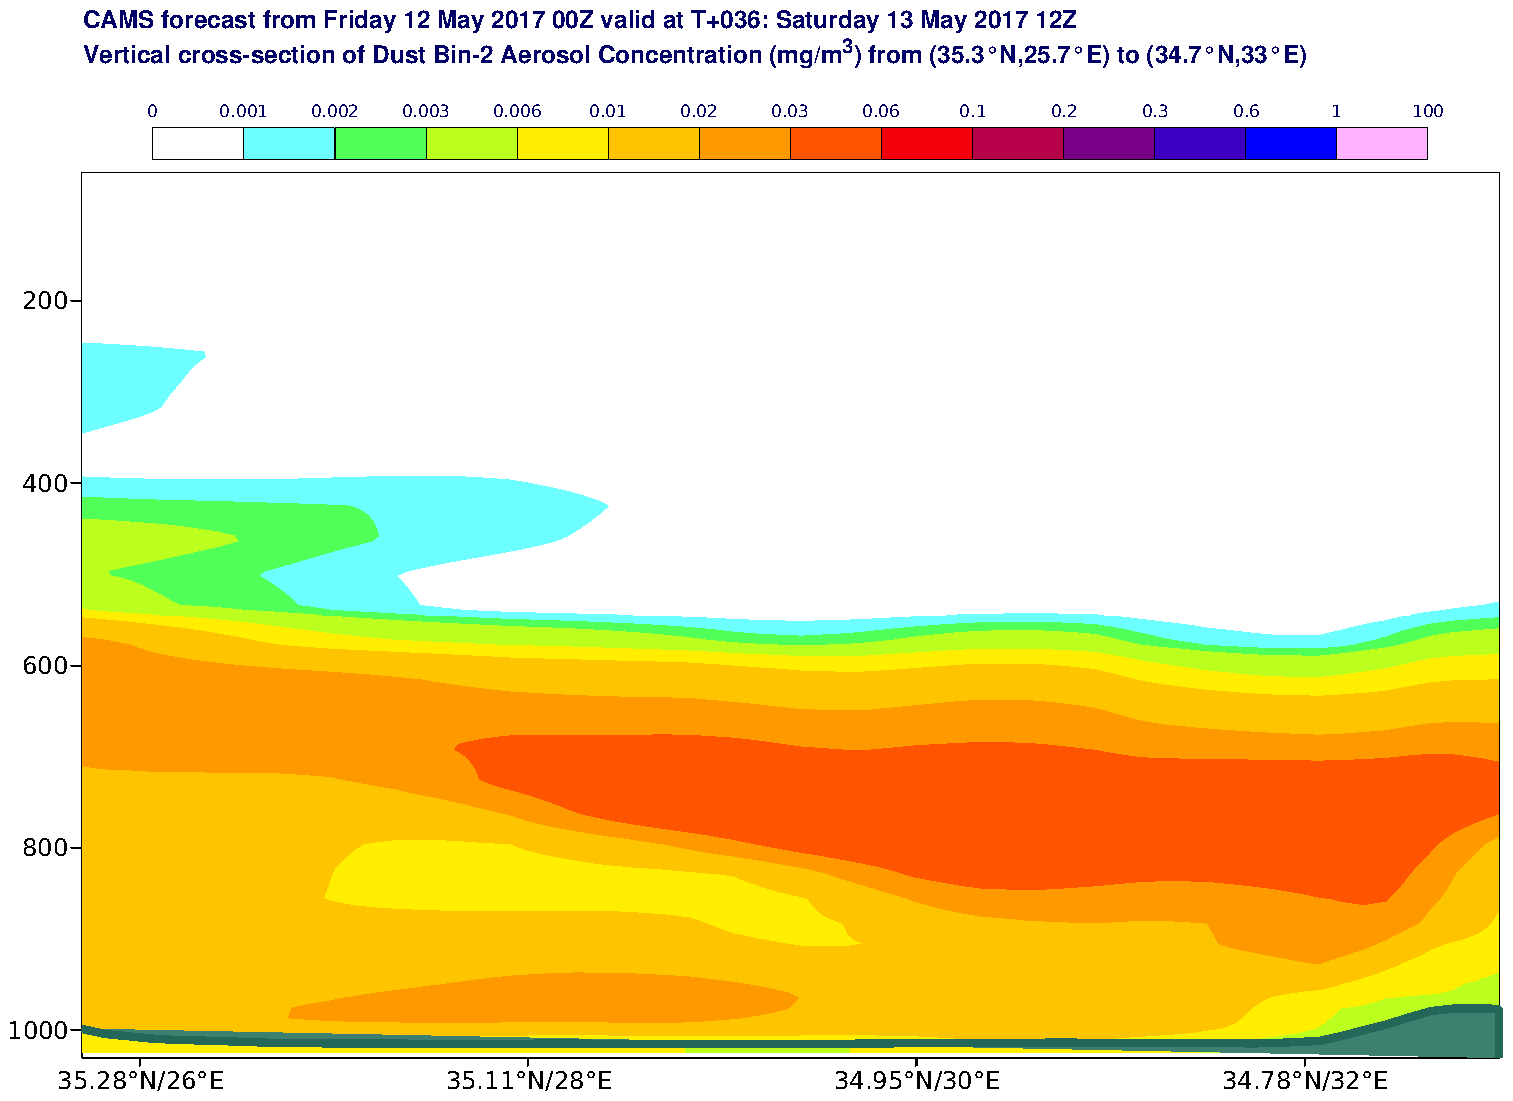 Vertical cross-section of Dust Bin-2 Aerosol Concentration (mg/m3) valid at T36 - 2017-05-13 12:00